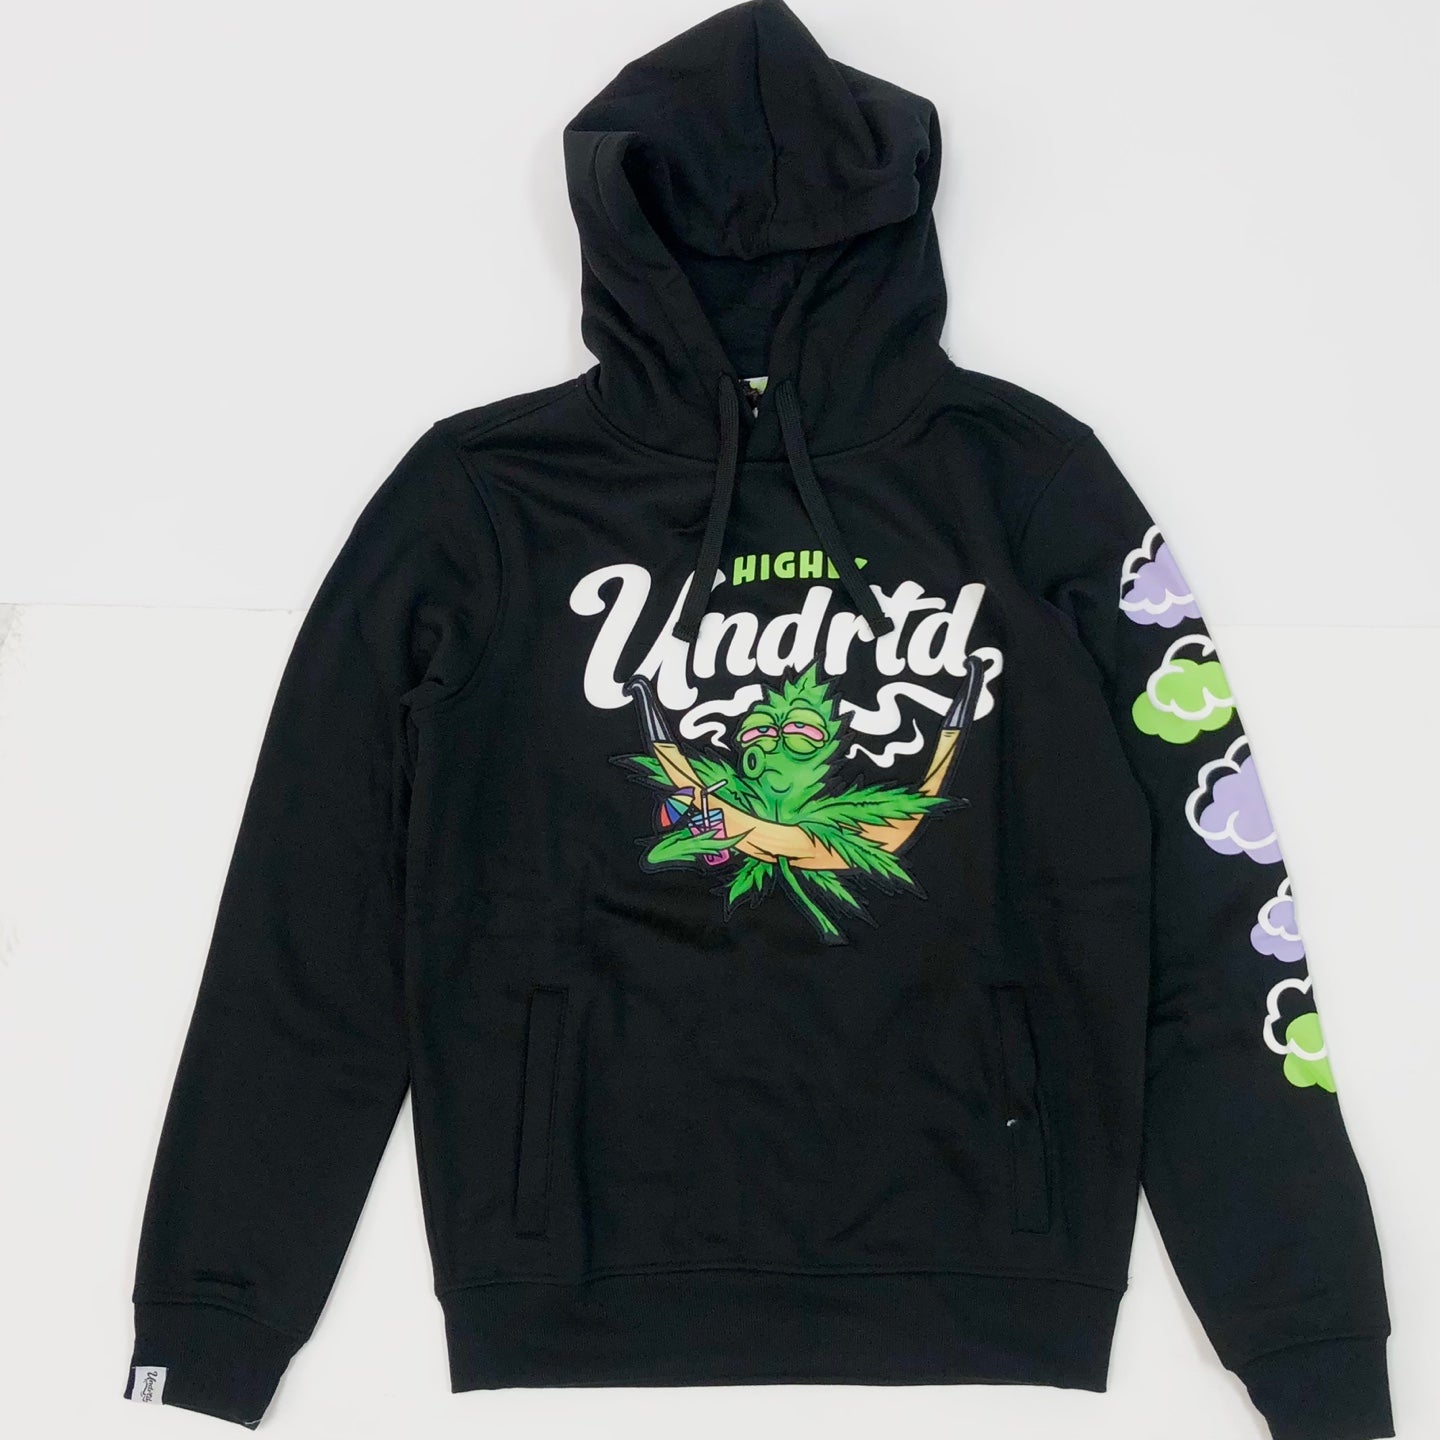 HIGHLY UNDRTD Smoky Vacation Graphic Pullover Hoodie - Black